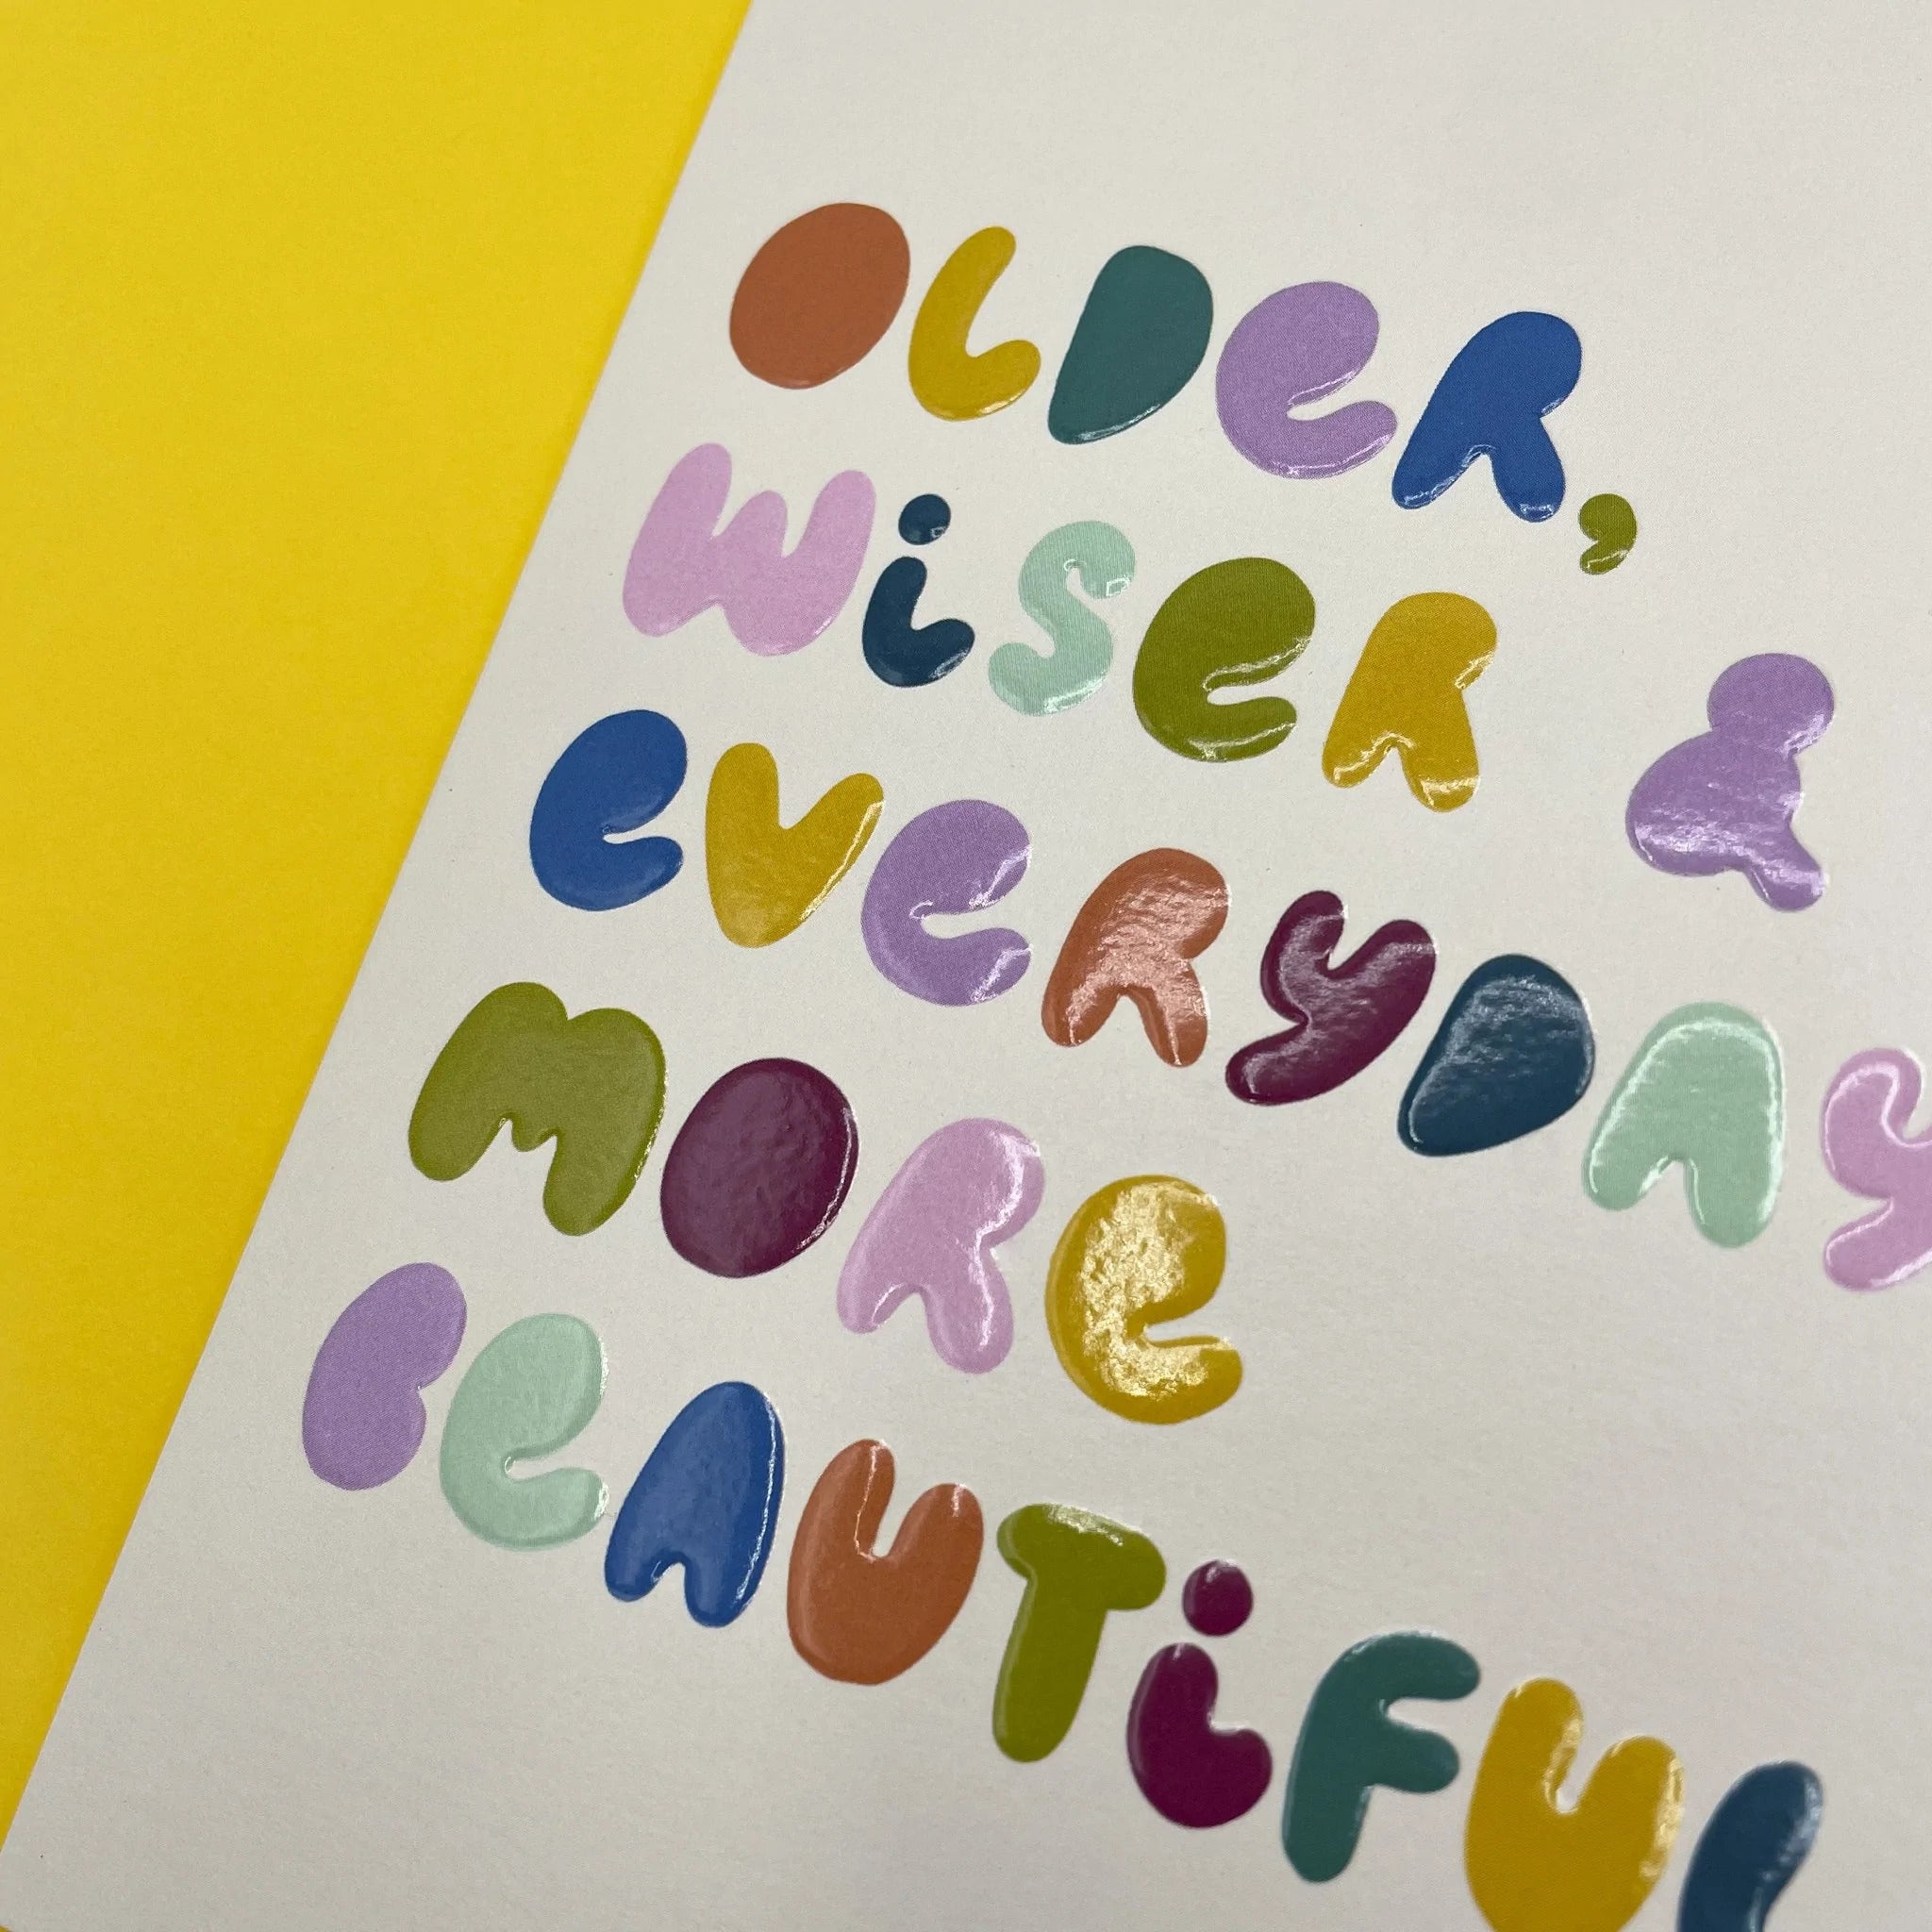 'Older, Wiser and Everyday More Beautiful' Card by Raspberry Blossom